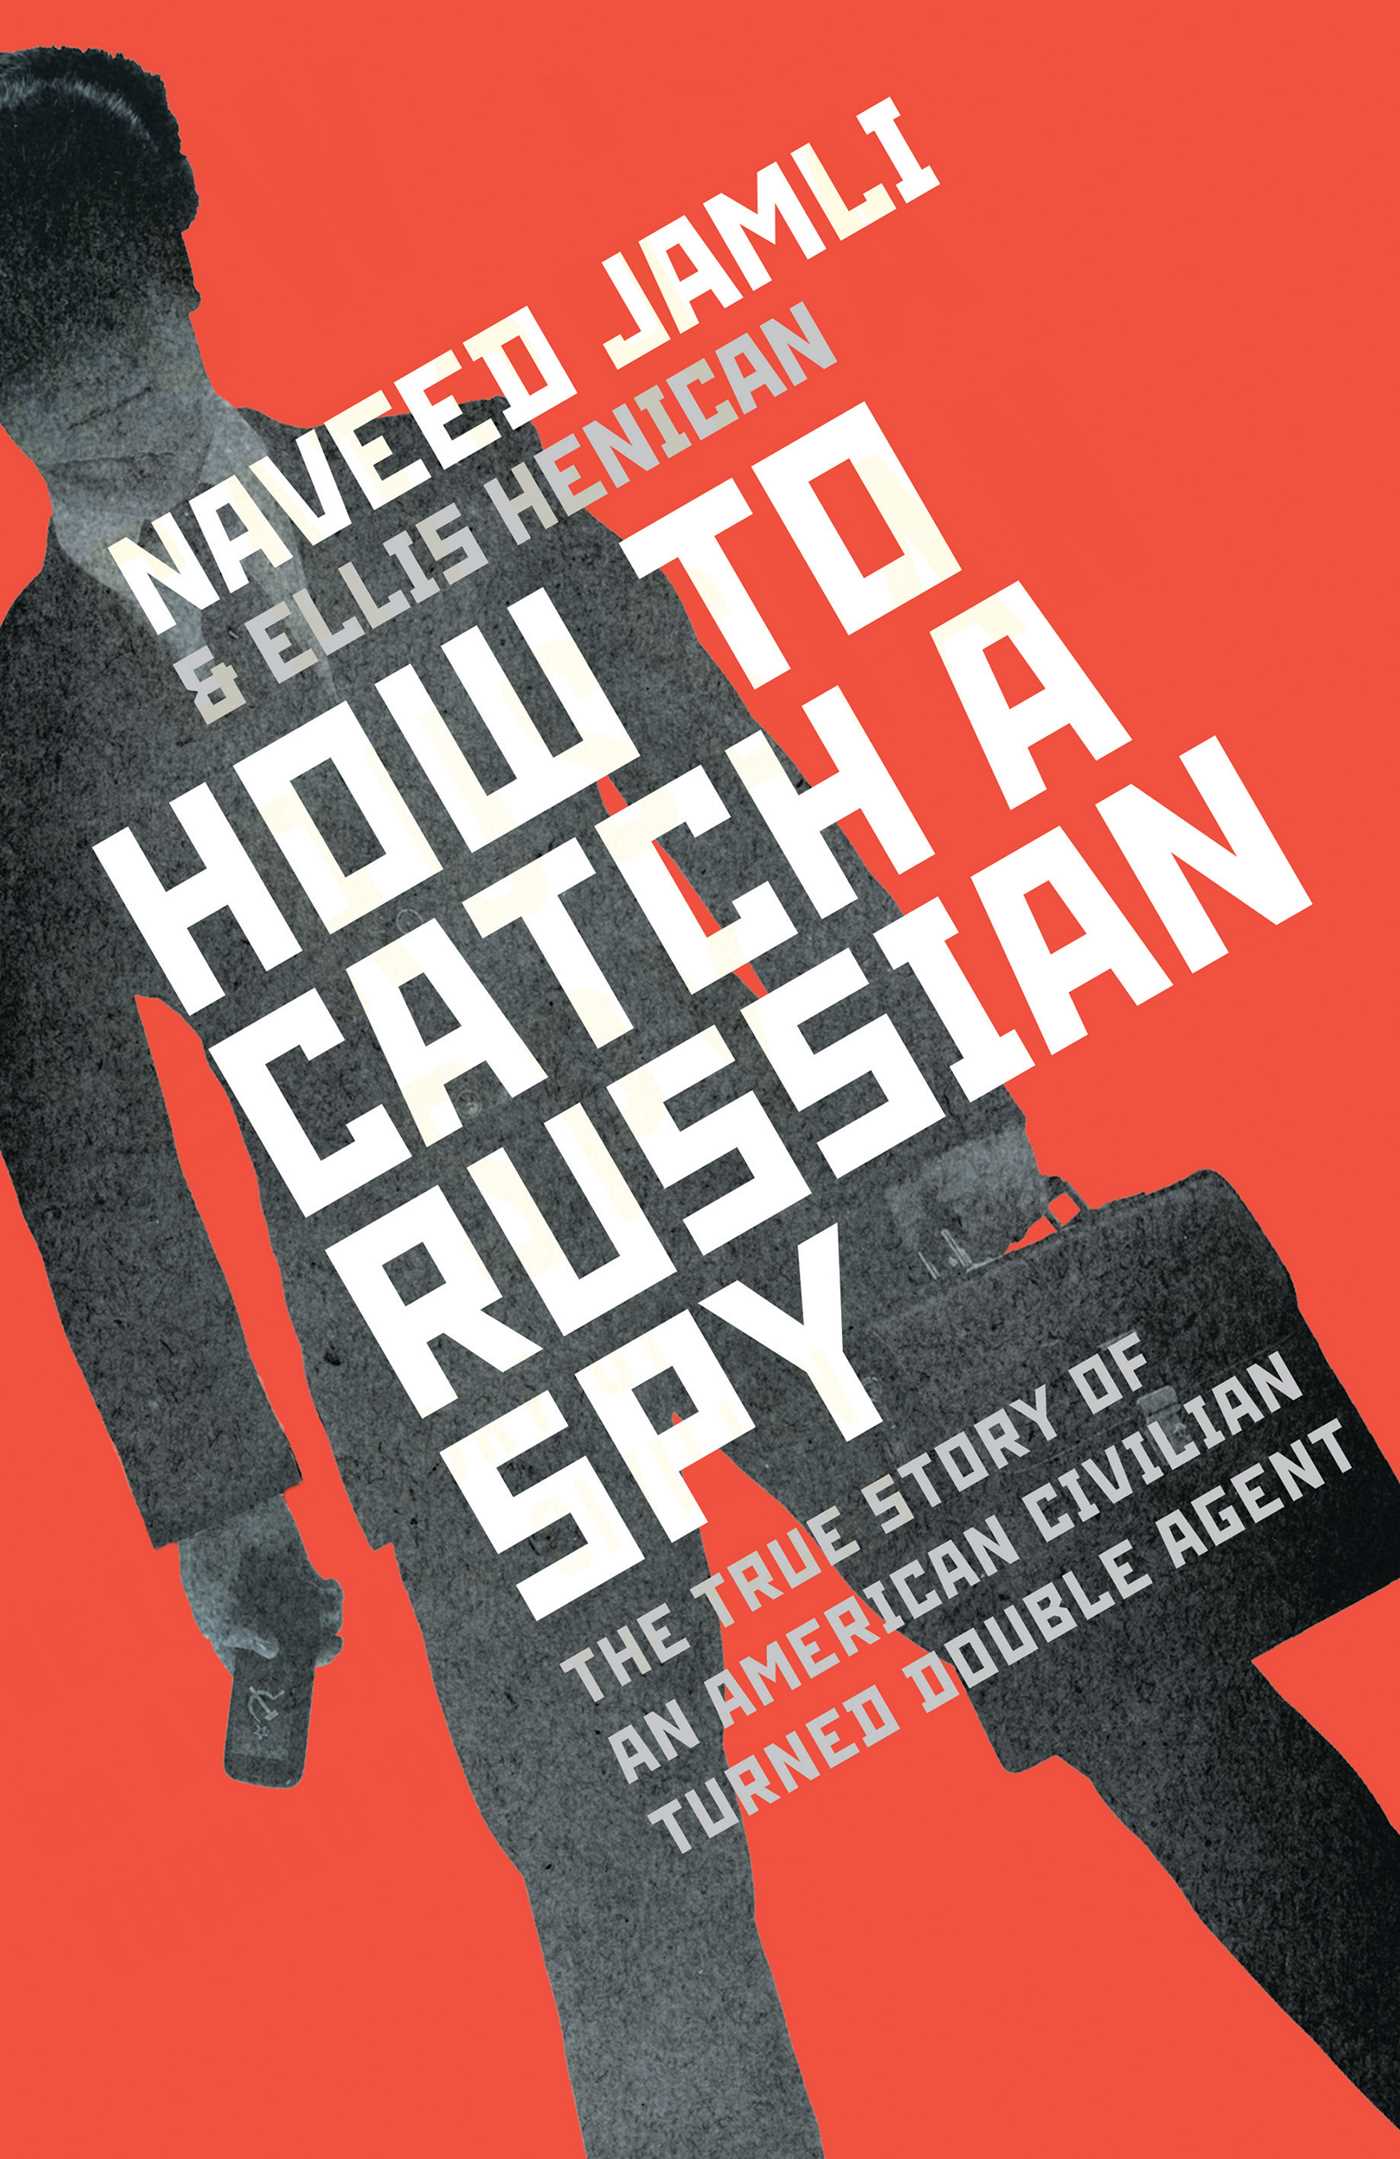 how-to-catch-a-russian-spy-9781471140884_hr.jpg